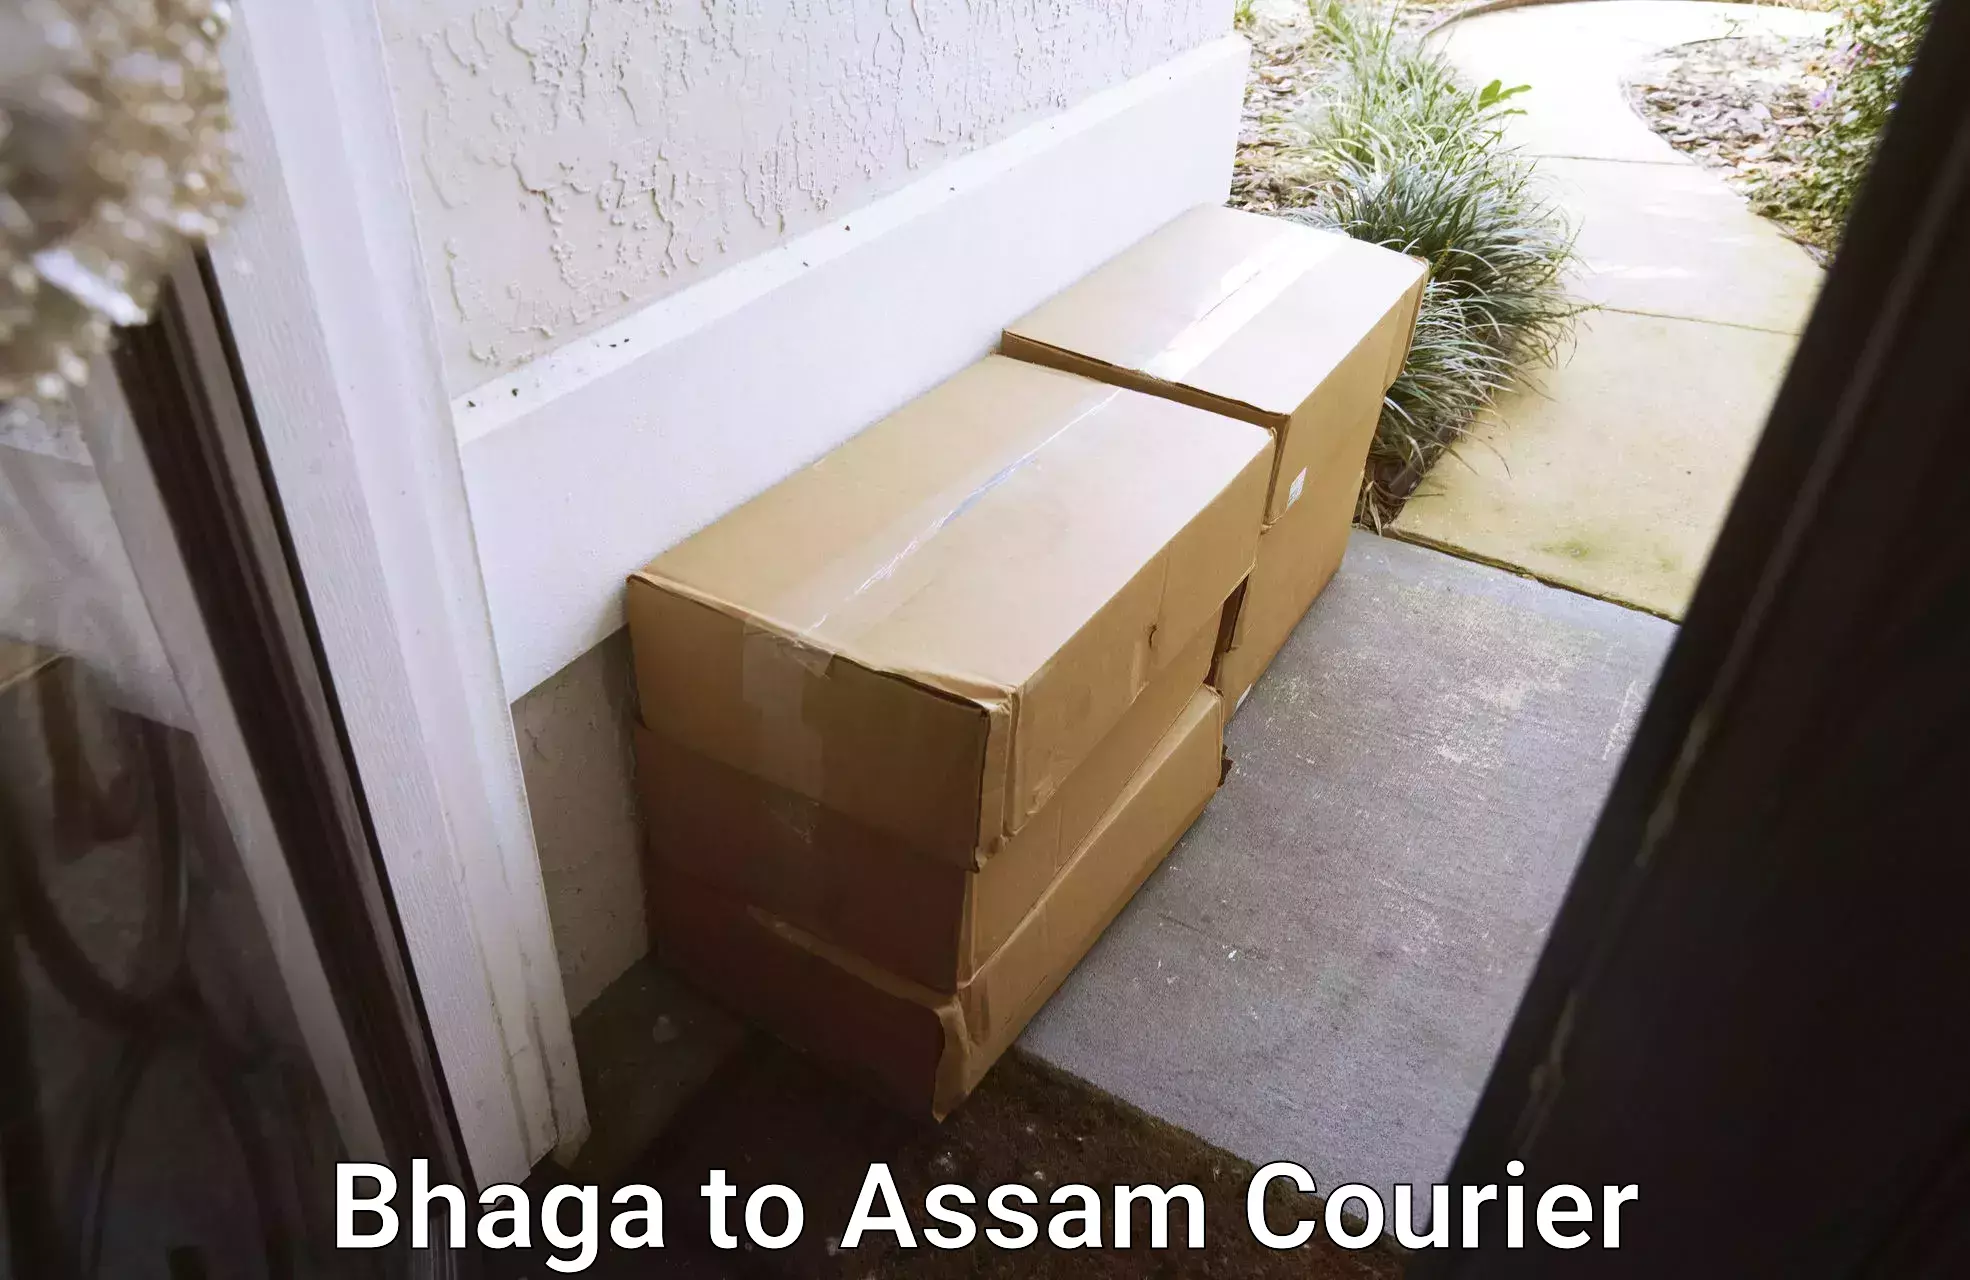 Local delivery service Bhaga to Assam